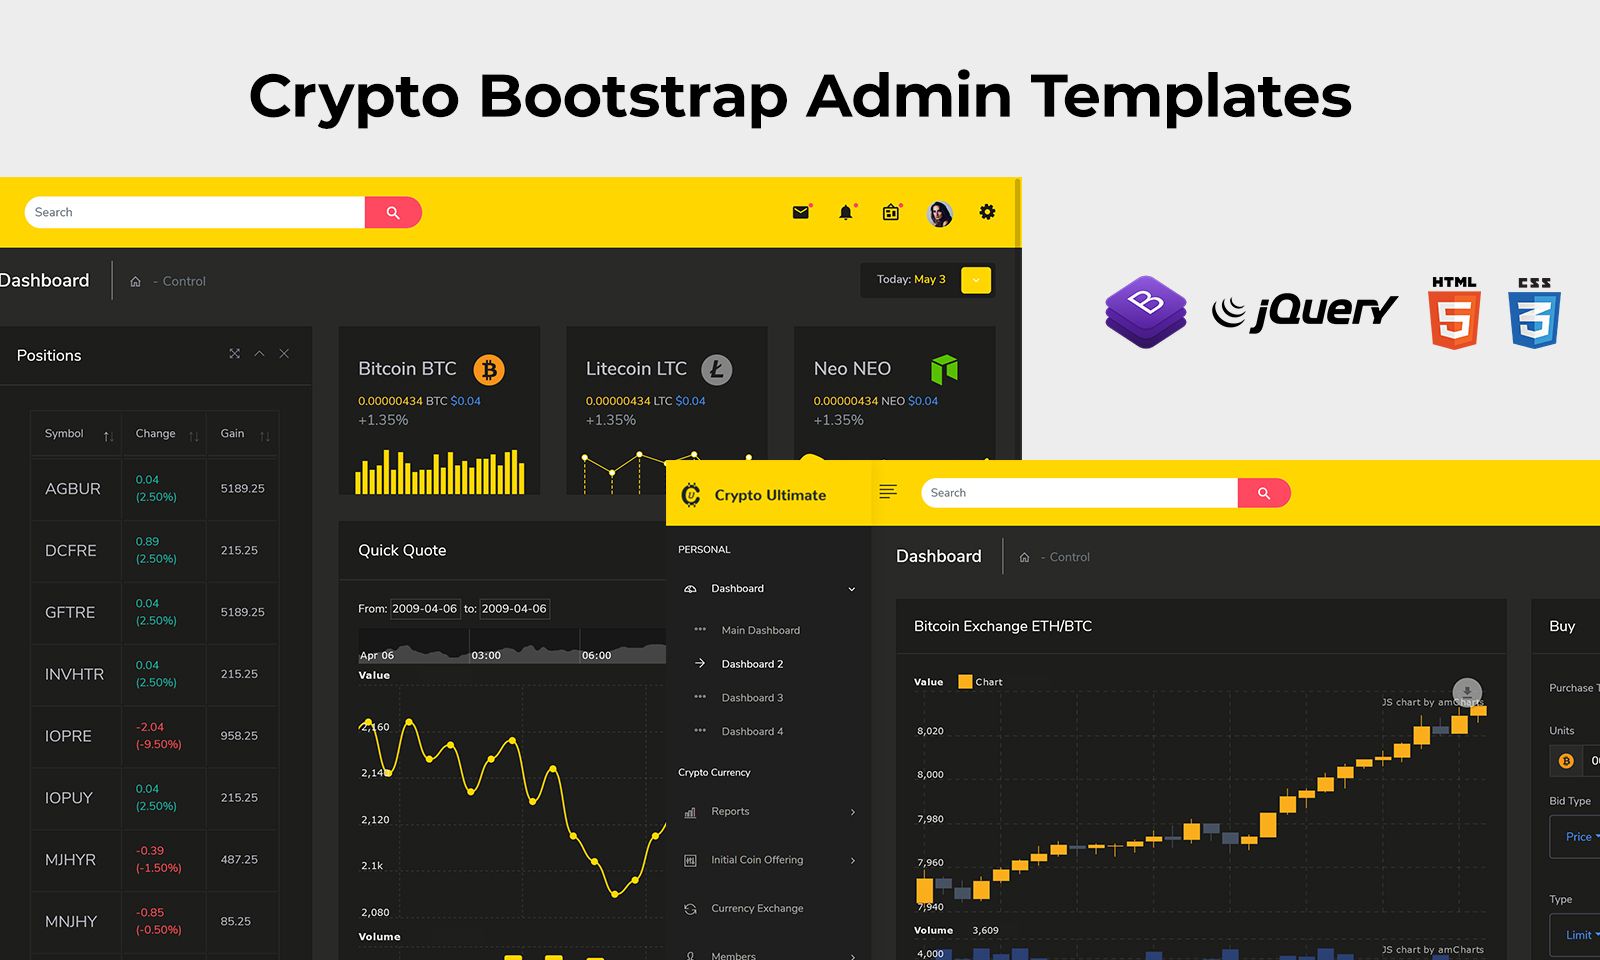 Crypto Bootstrap Admin Templates For CryptoCurrency Dashboard